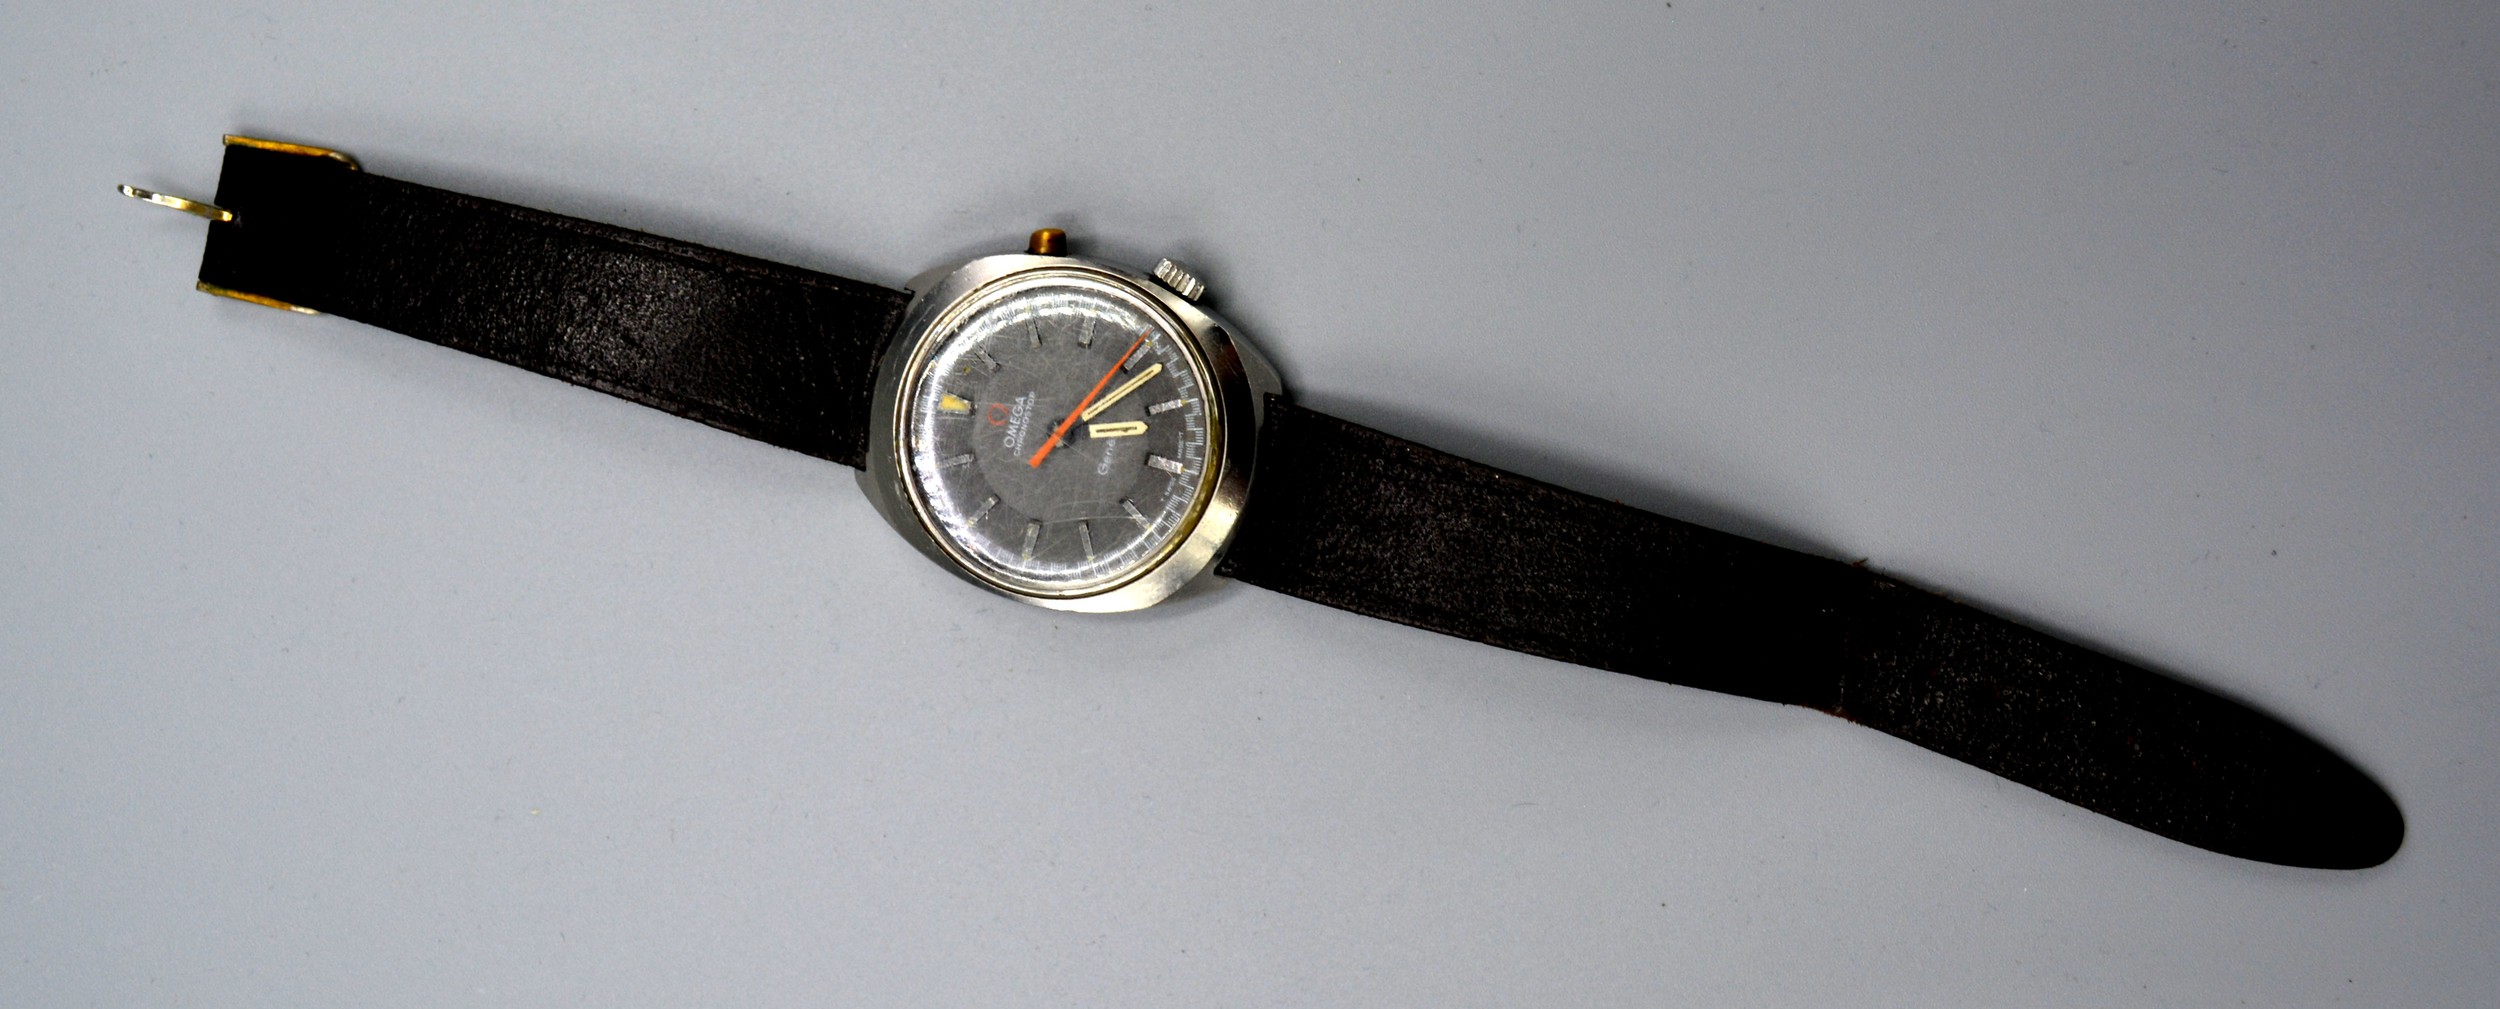 An Omega Chrono Stop Gentleman's Wrist Watch with stainless steel case and associated leather strap - Image 2 of 4